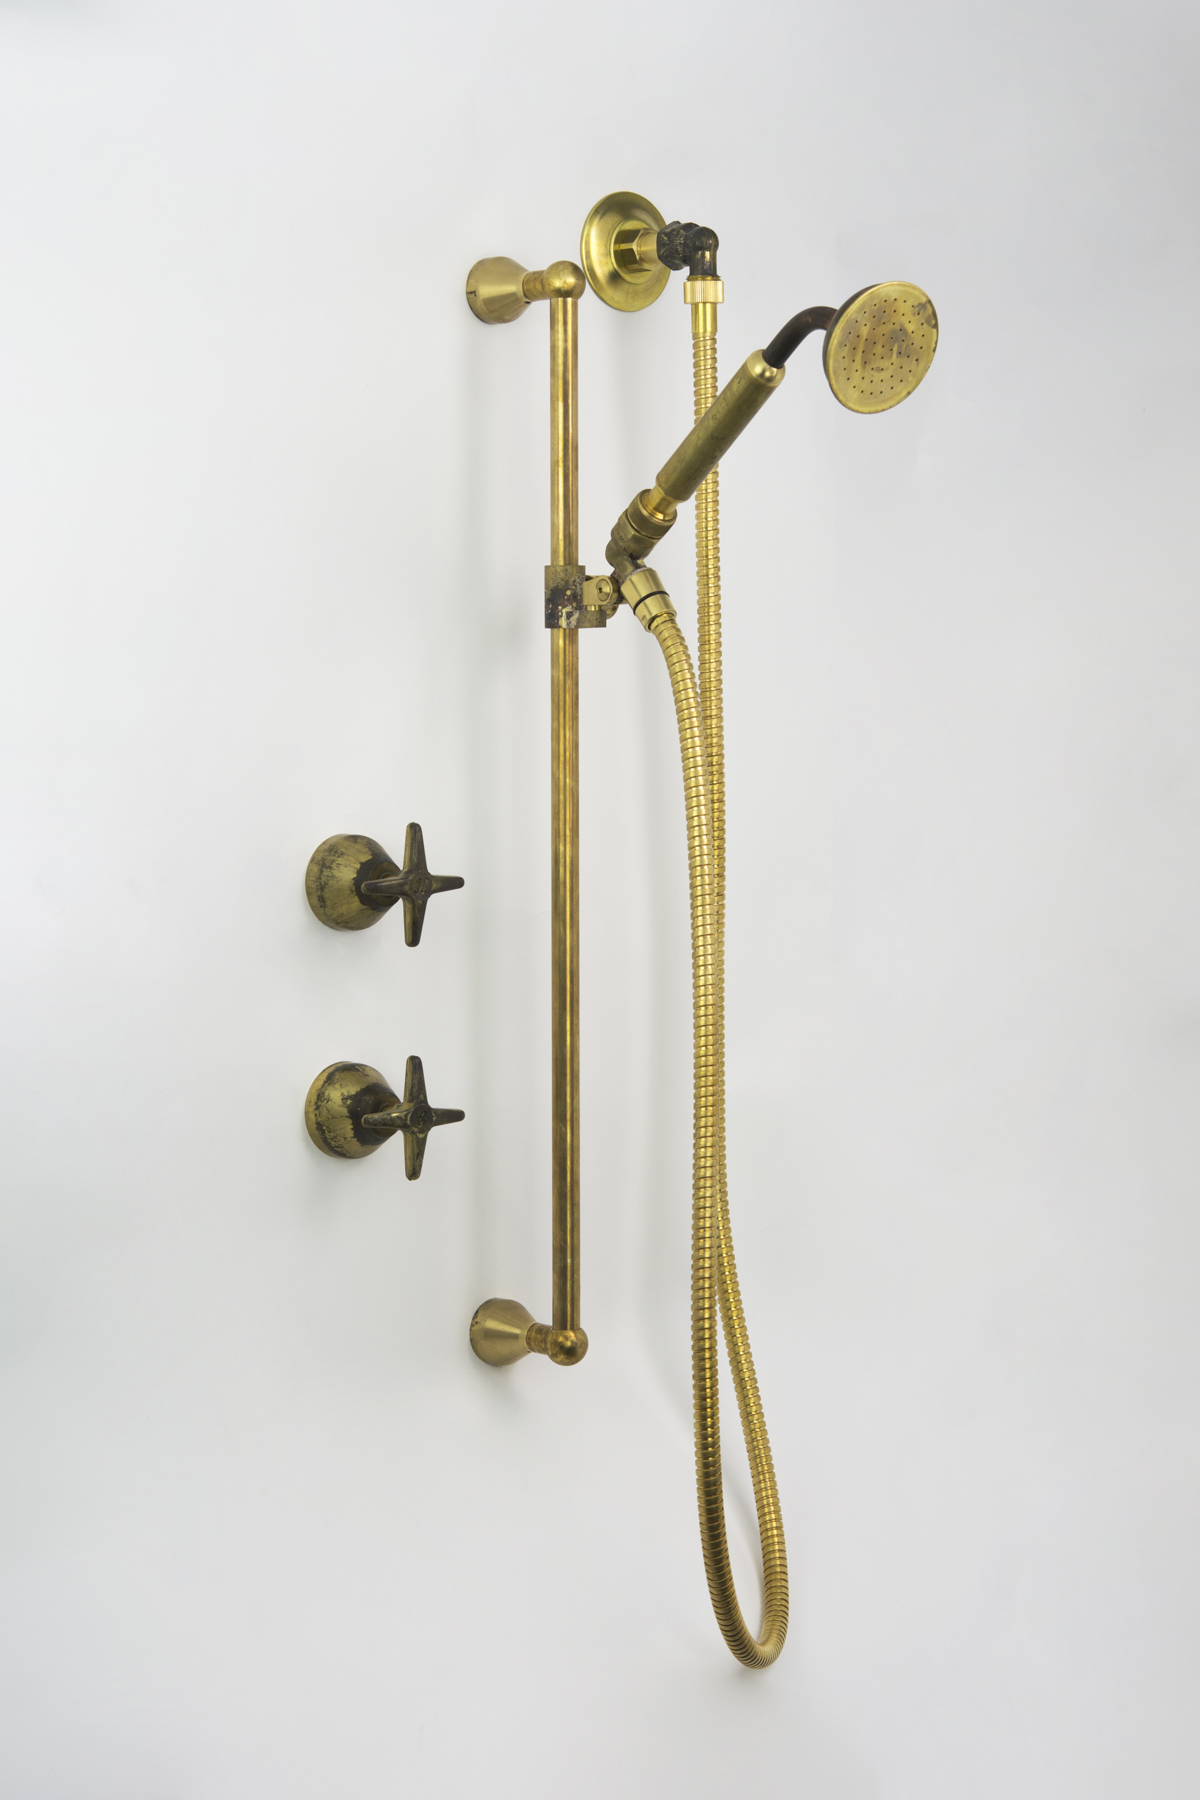 CB Ideal Seaview Sliding Rail Shower Kit in Raw Brass with Raw Brass for Handshower Handle